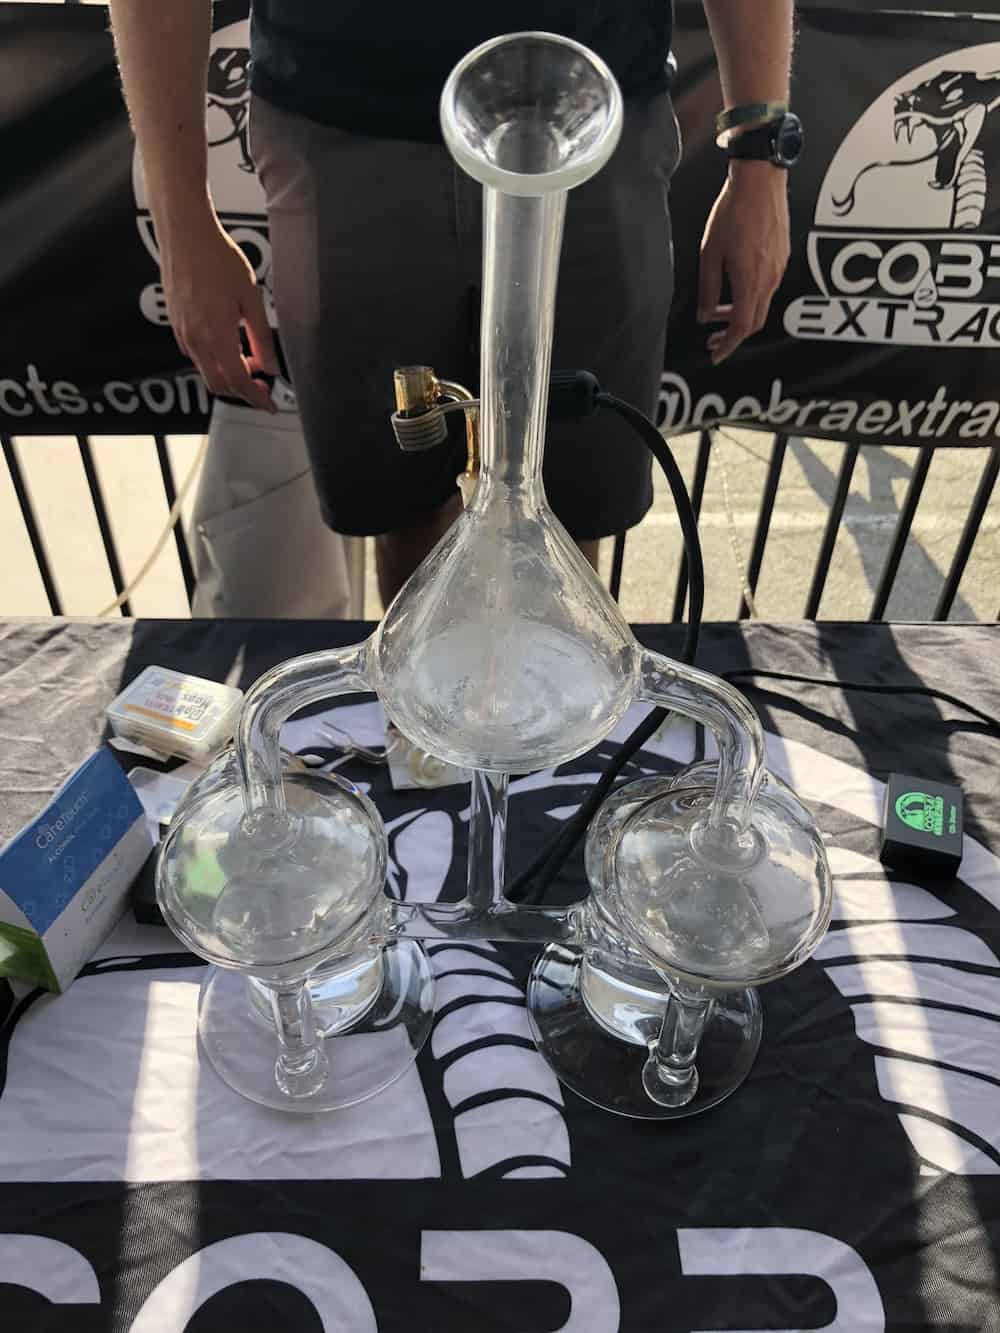 The 15 Dankest I Saw At The Cannabis Cup